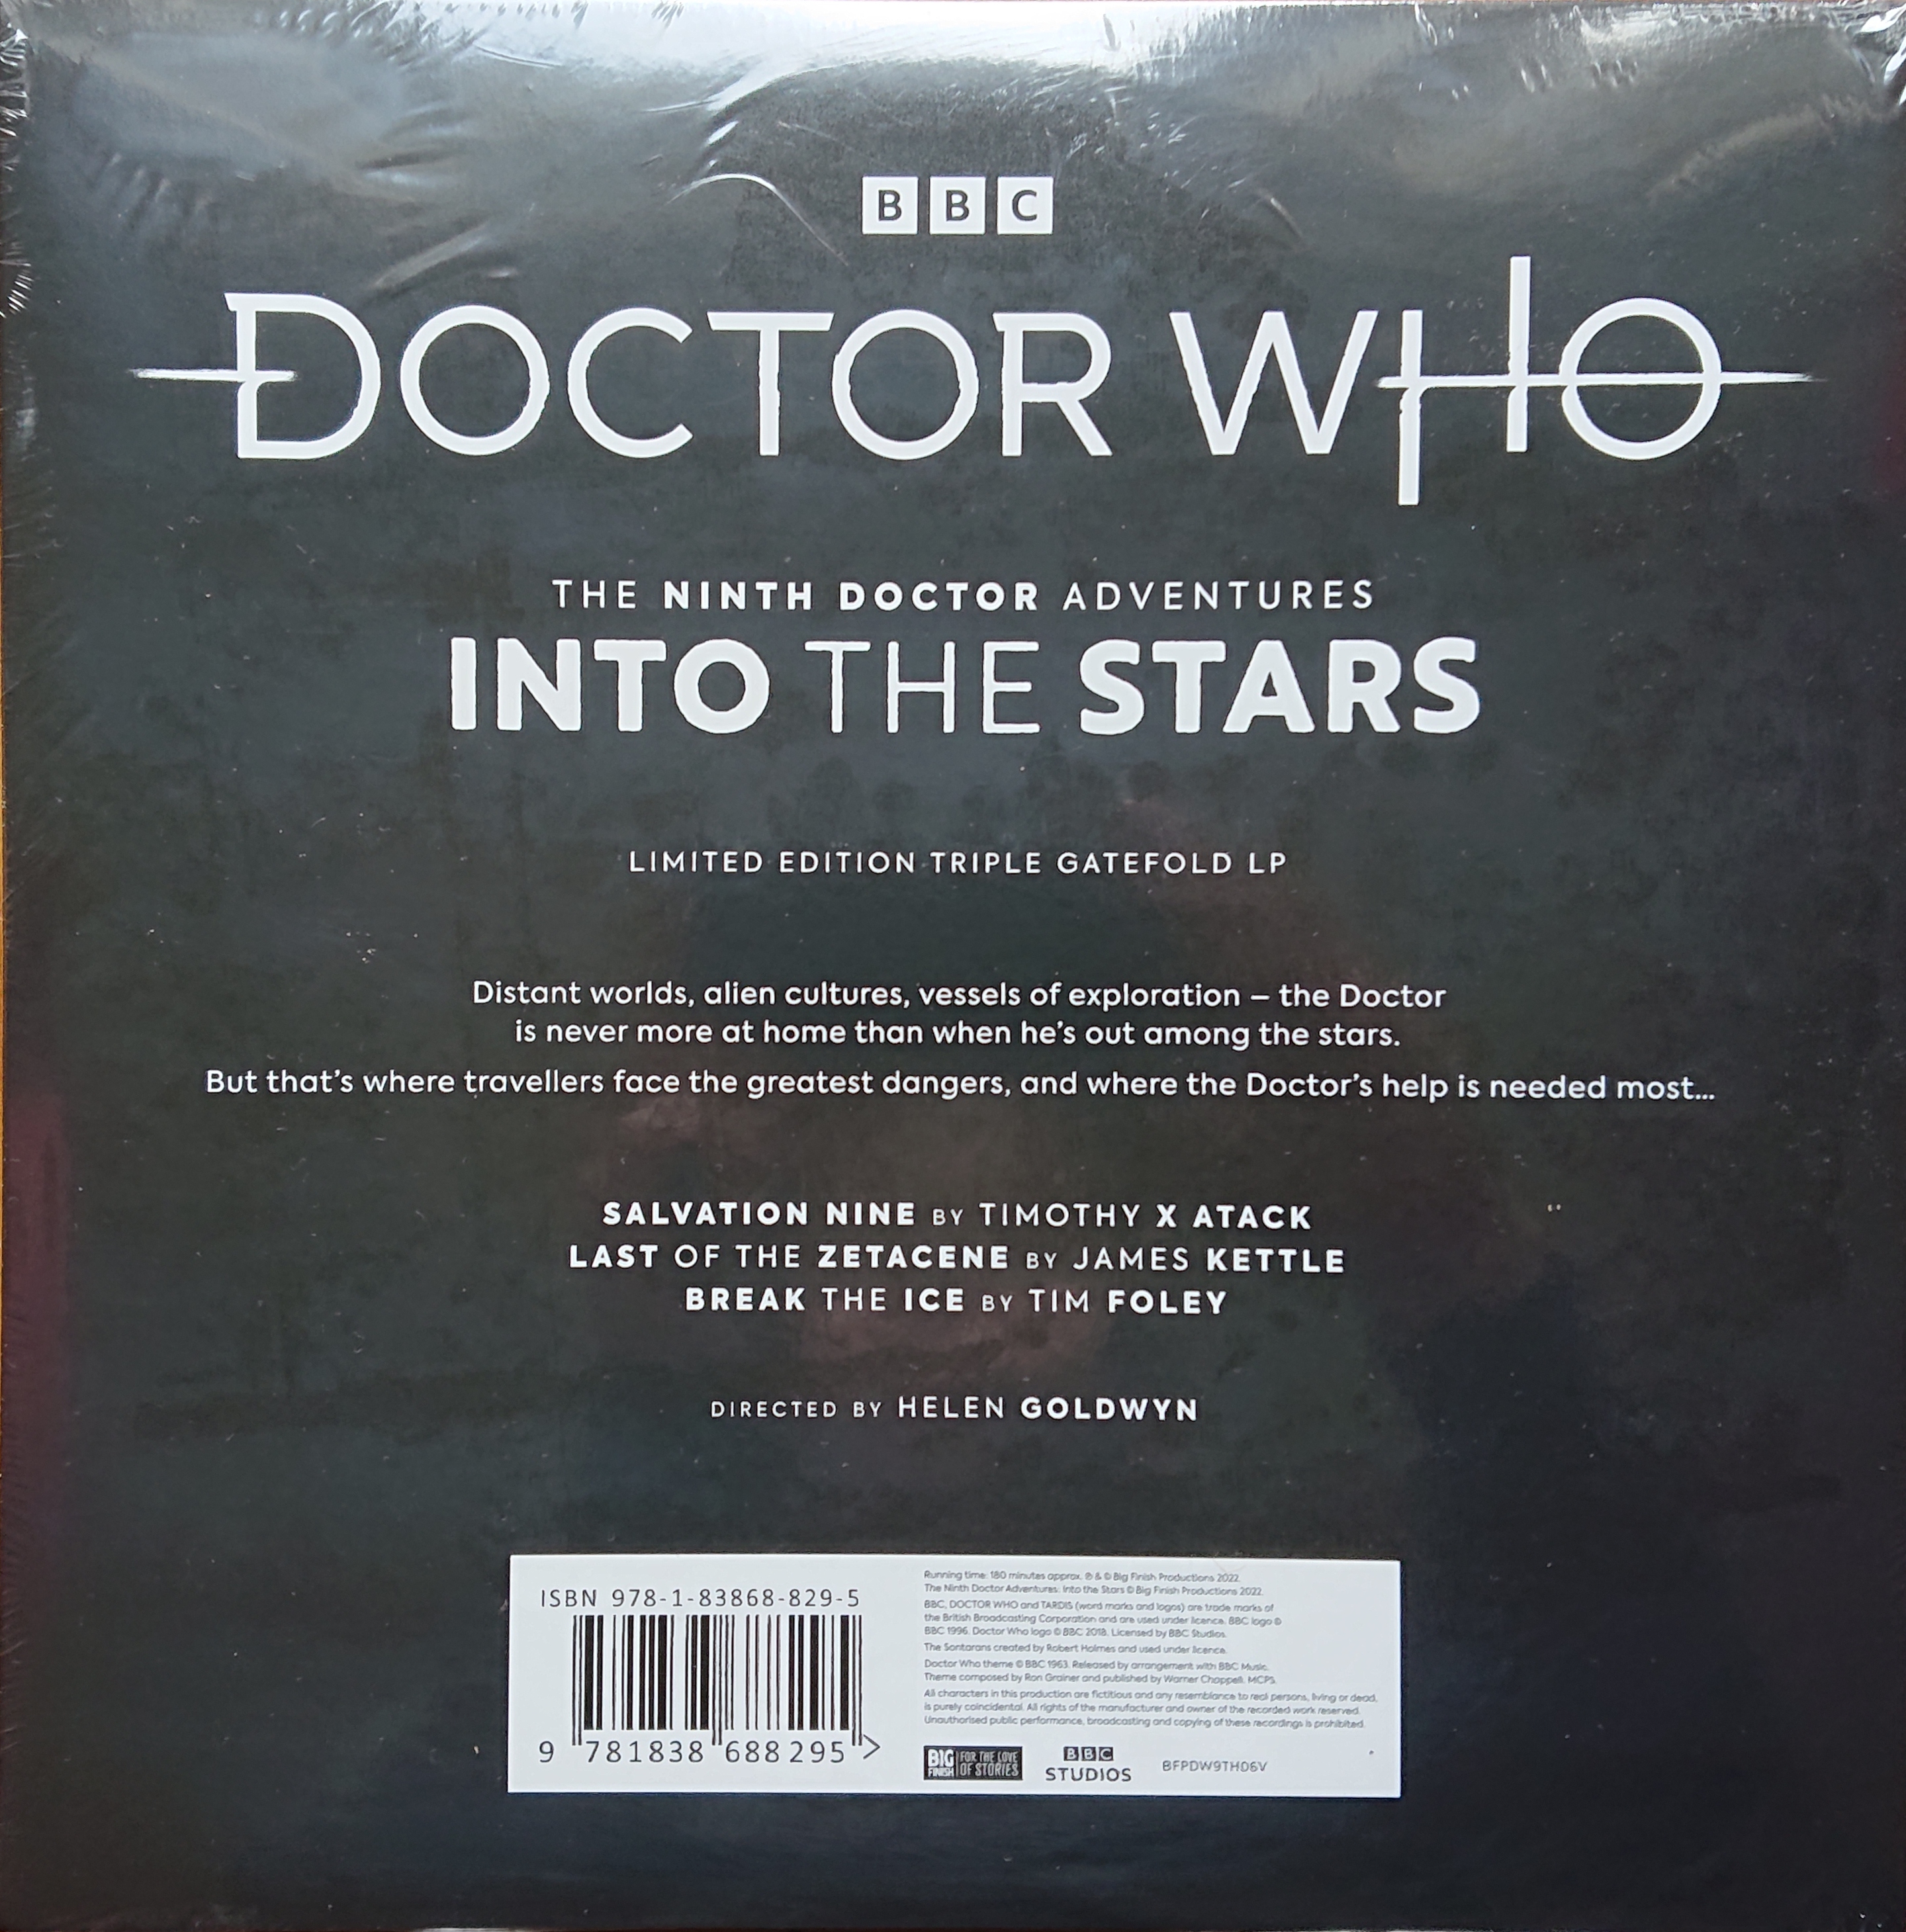 Picture of BFPDW9TH06V Doctor Who - The Ninth Doctor Adventures 2.2: Into the stars by artist Timothy X Atack / James Kettle / Tim Foley from the BBC records and Tapes library